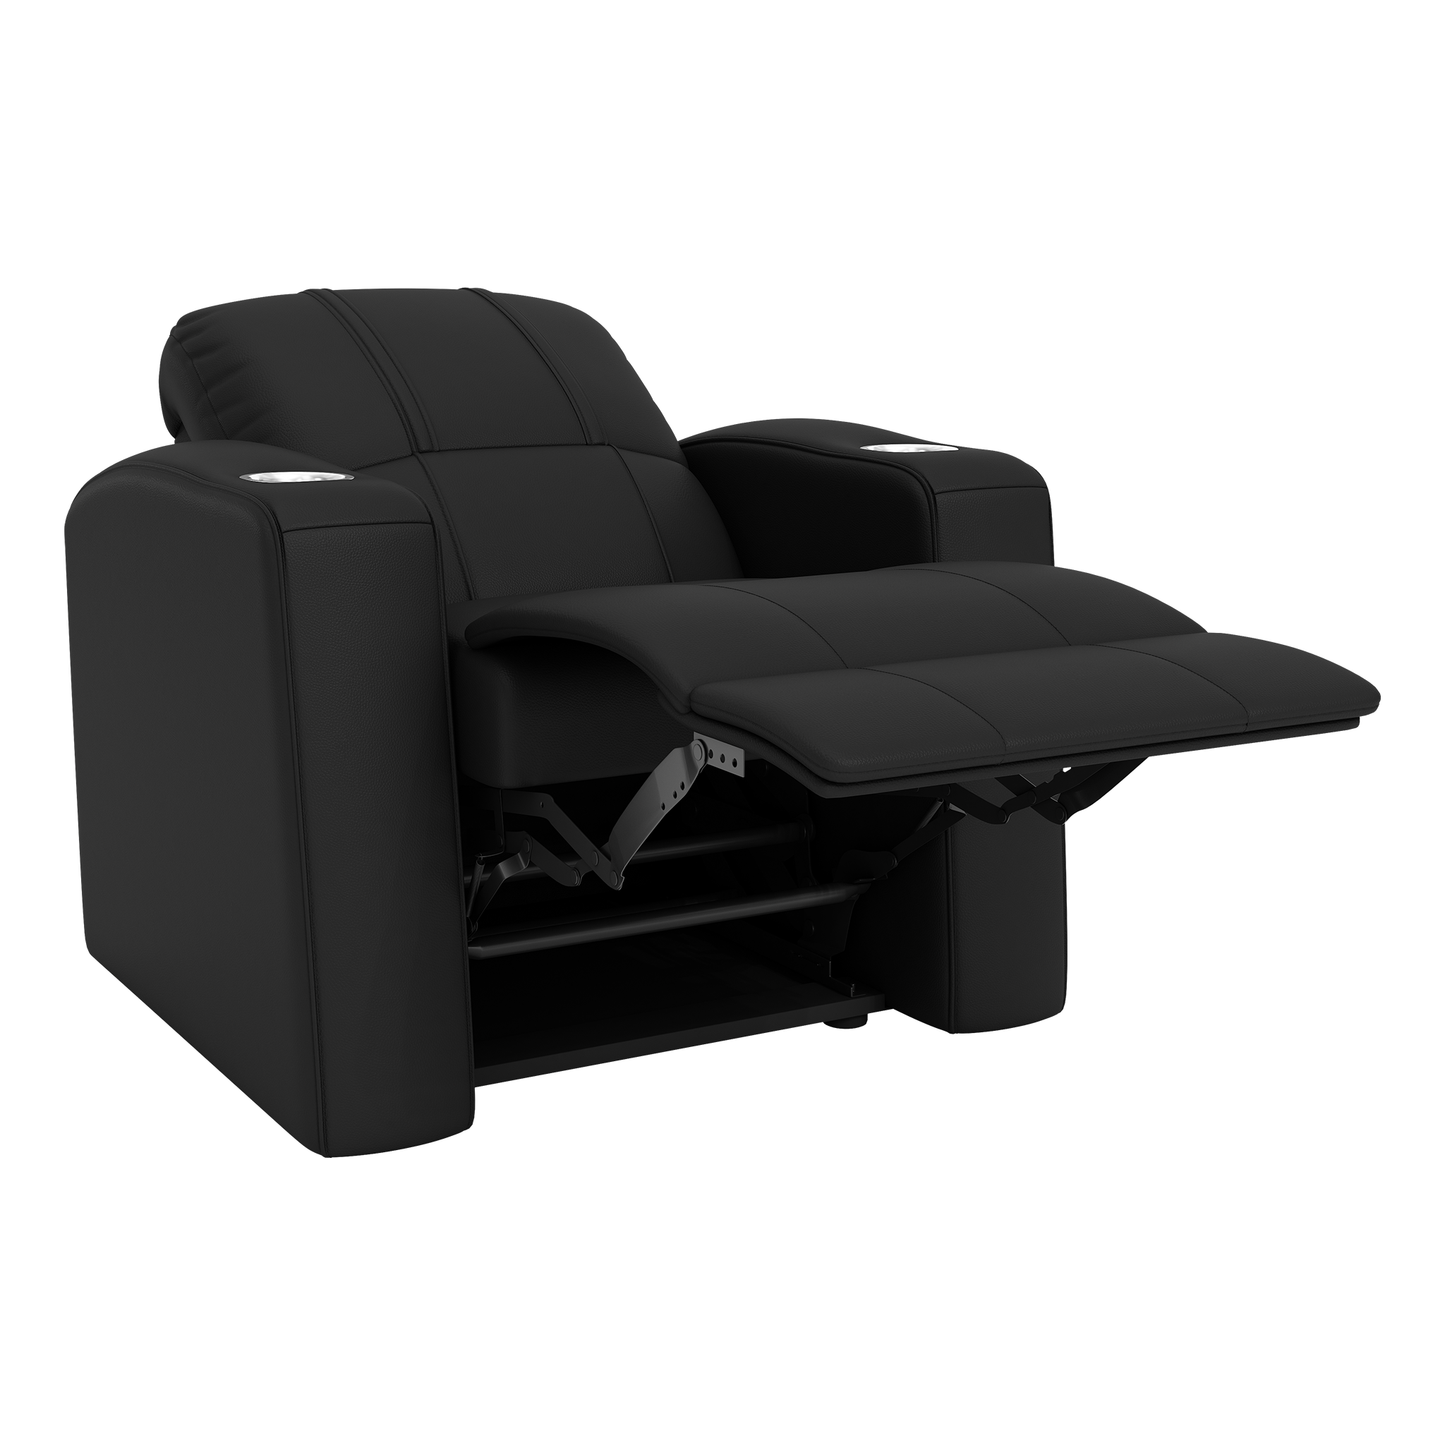 Relax Home Theater Recliner with Sporting Kansas City Logo